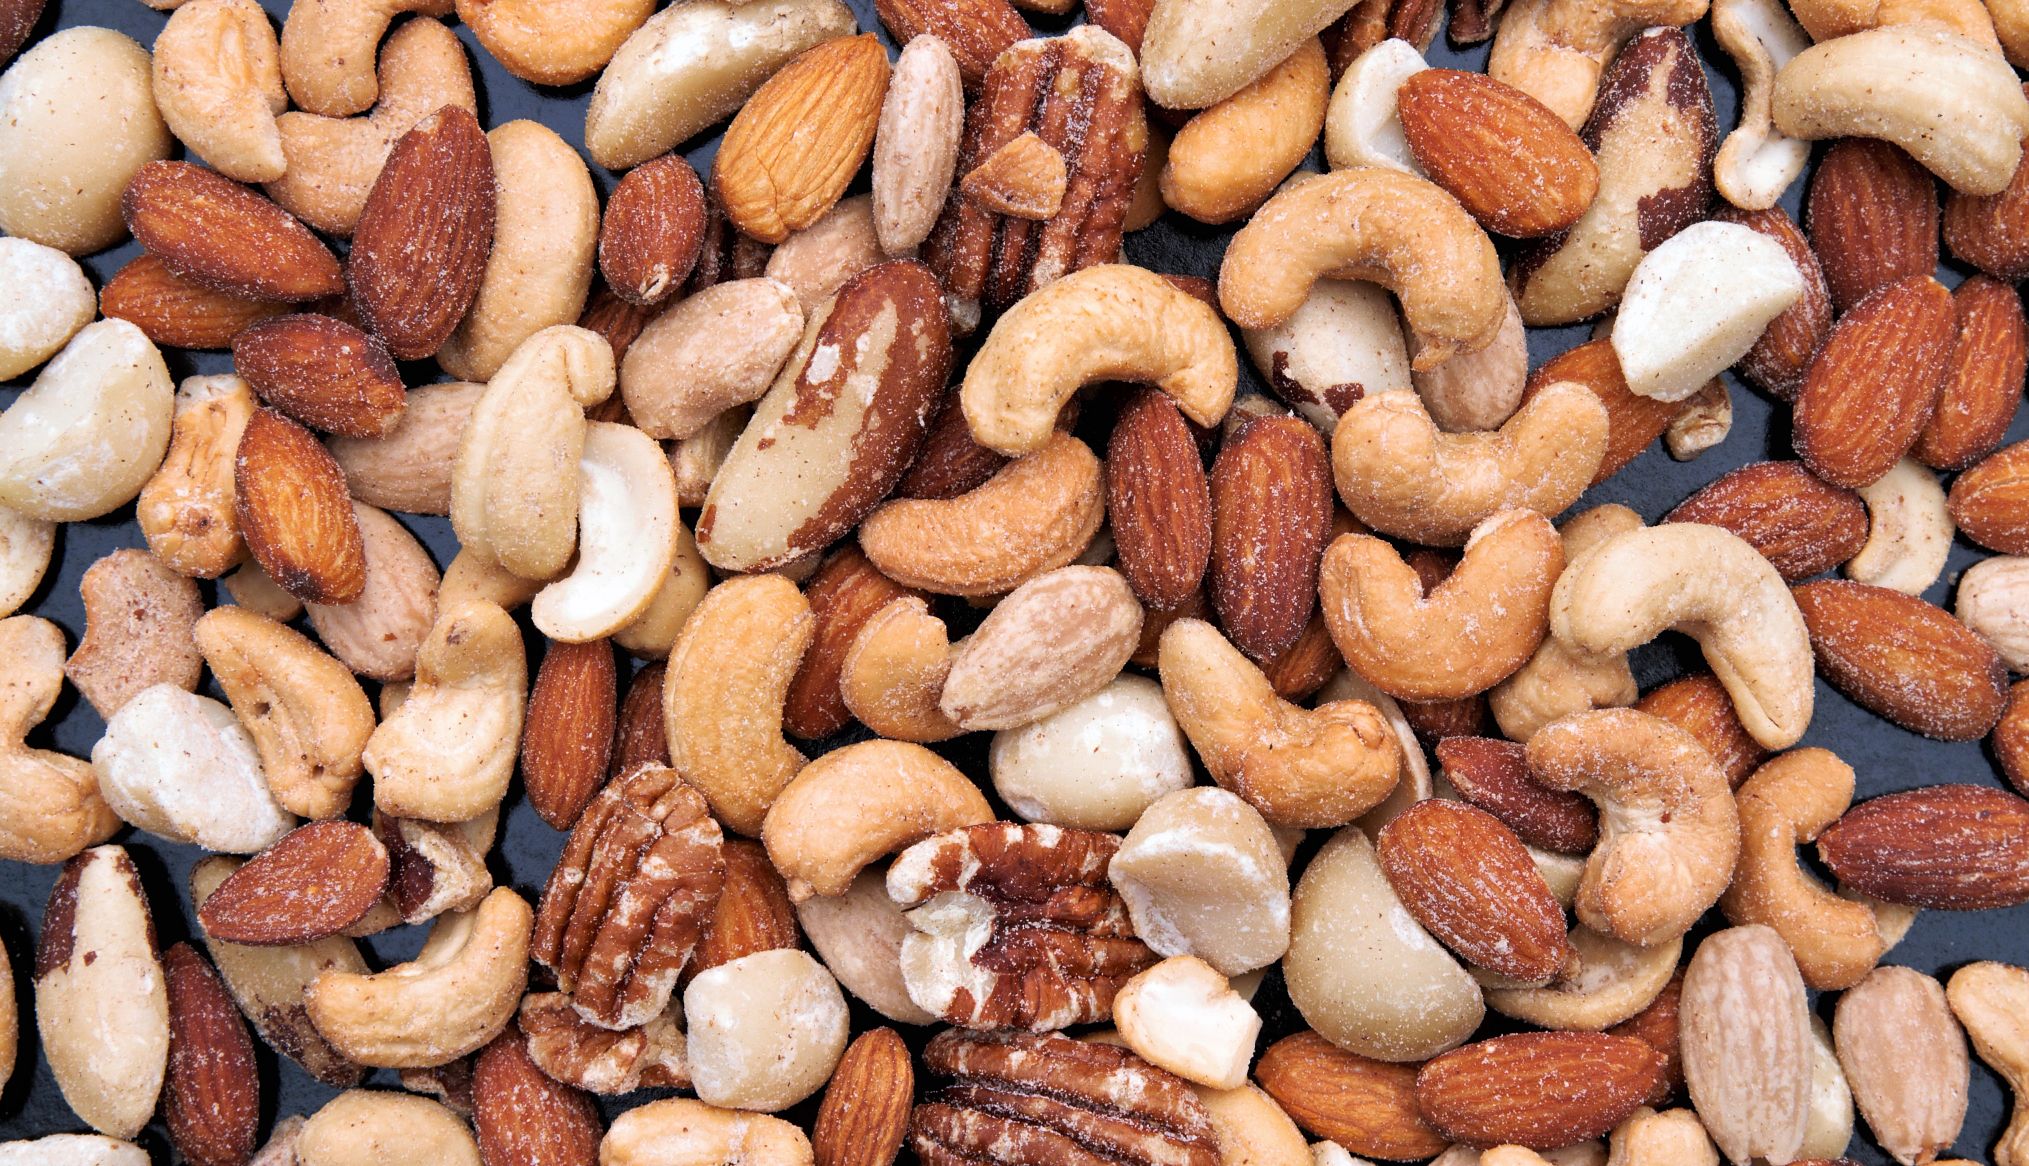 mixed nuts spread out on a dark background